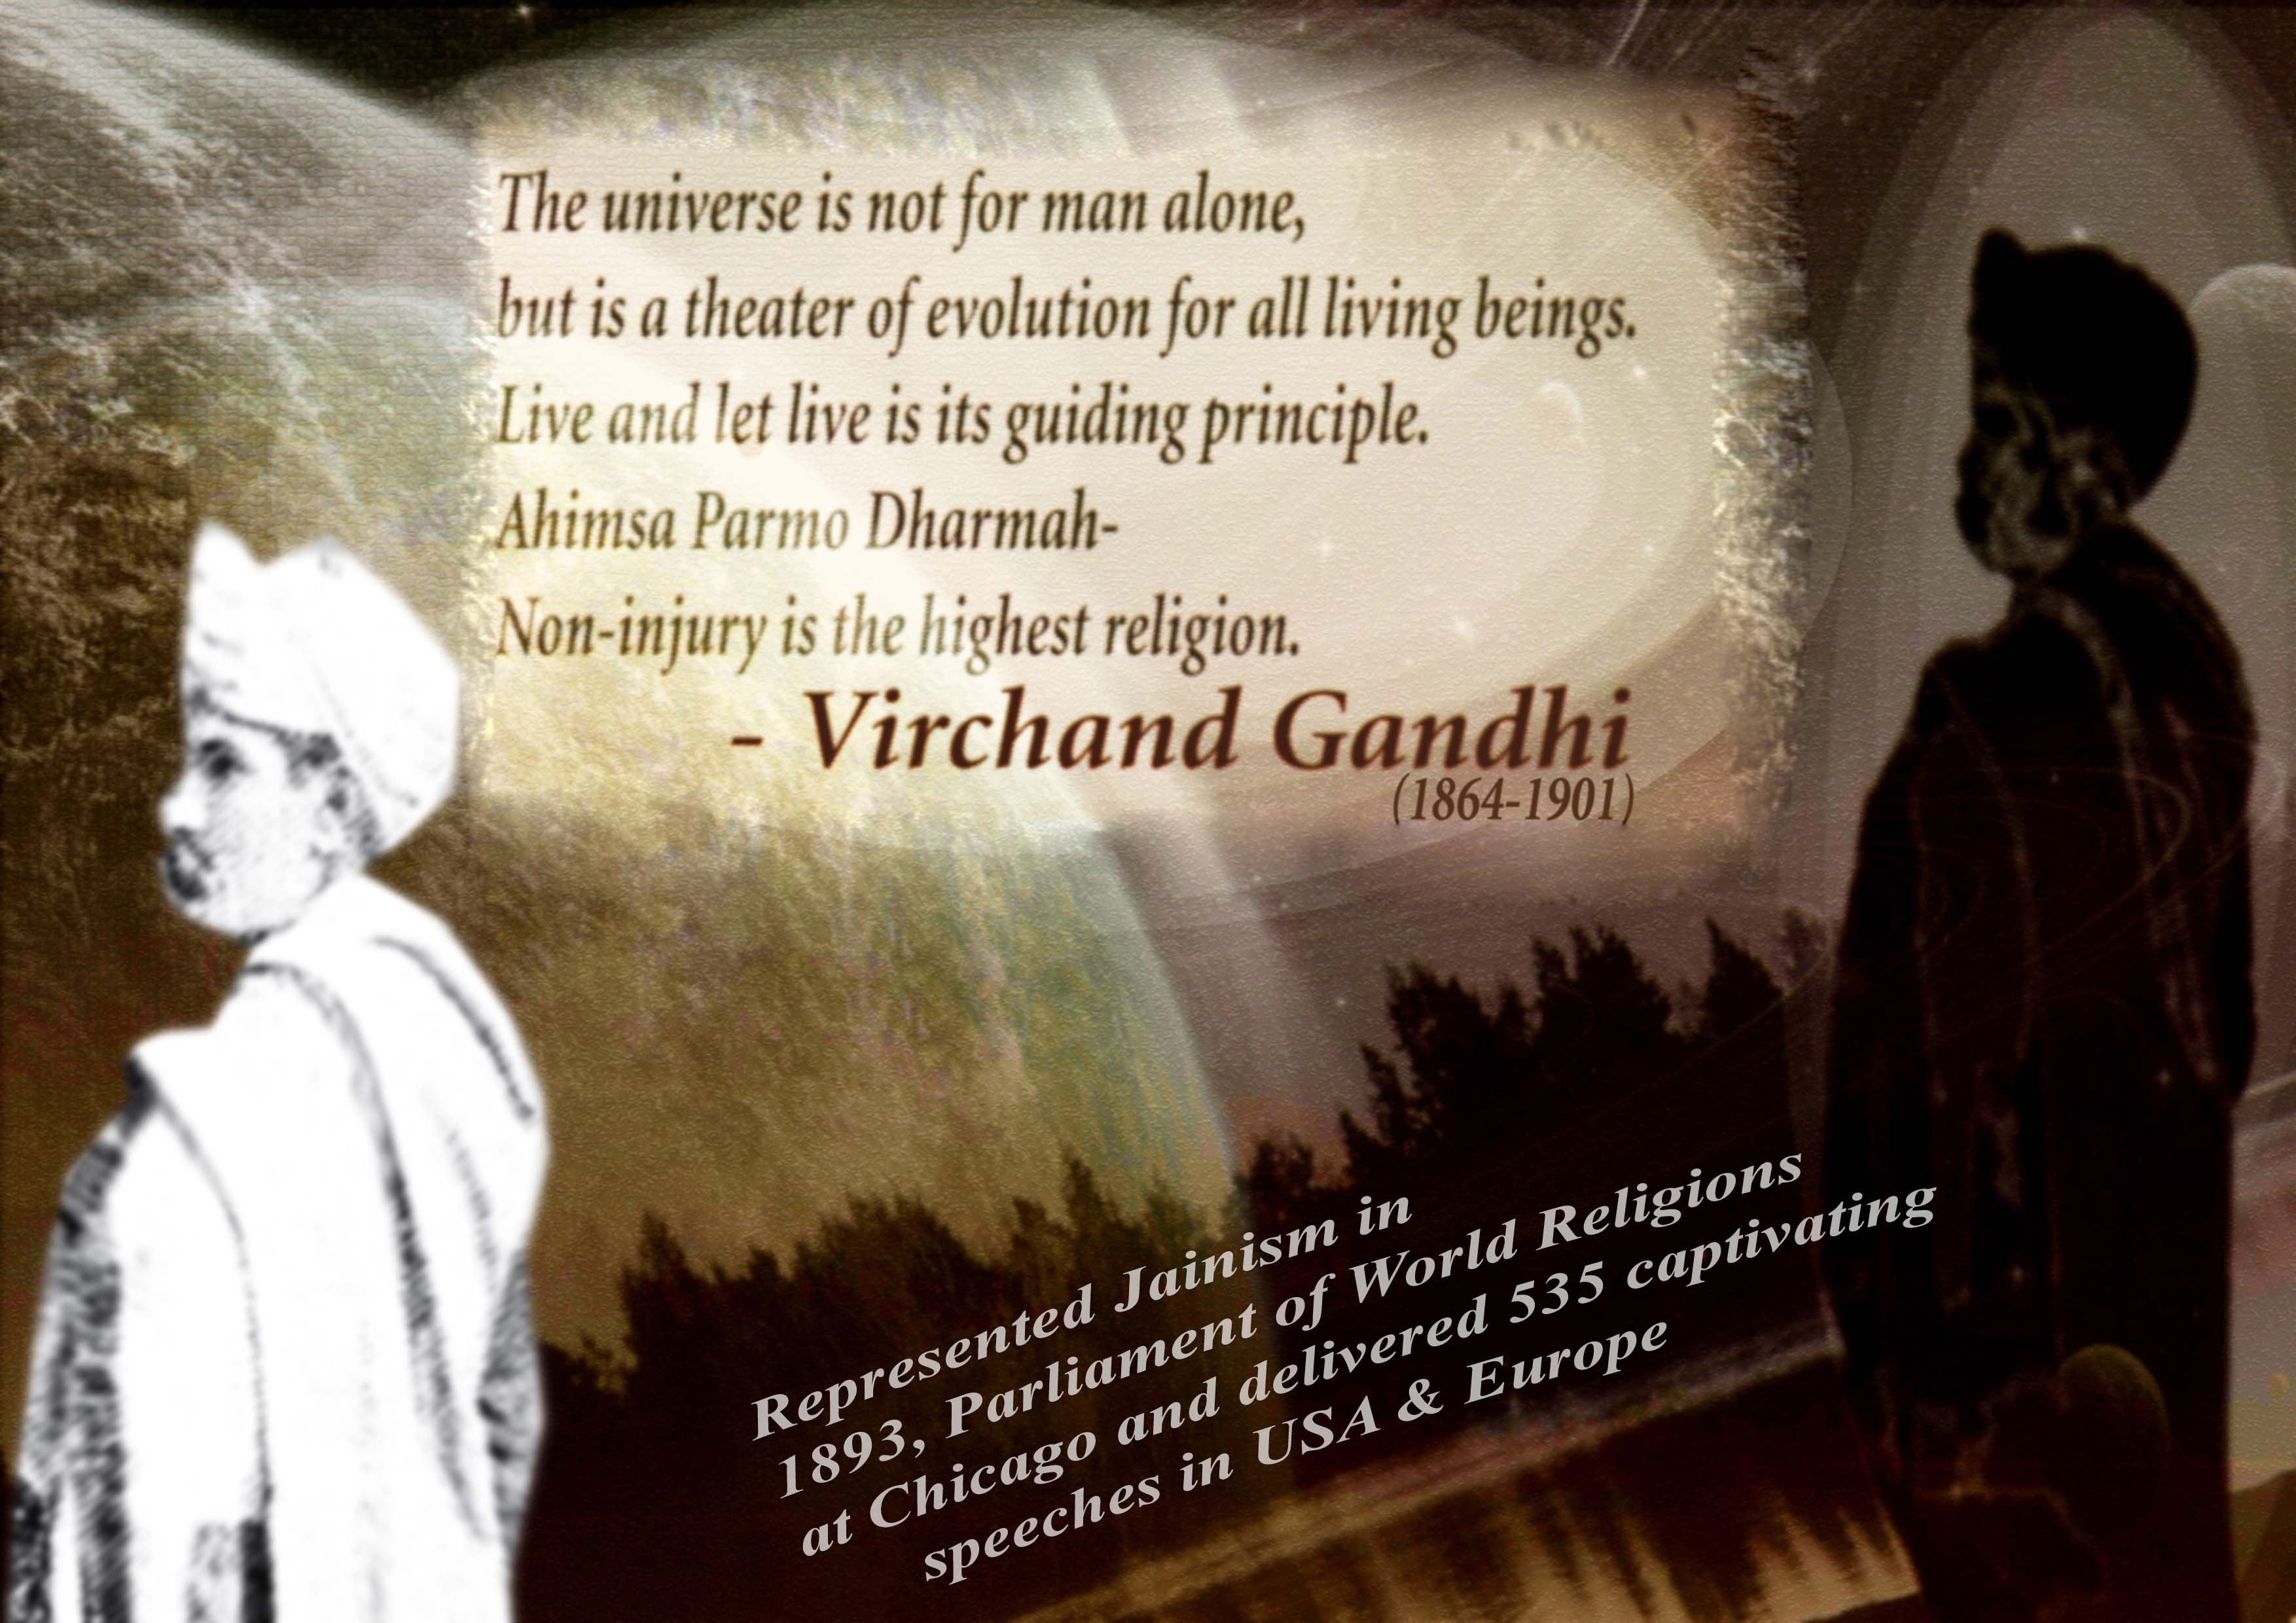 The universe is not for man alone, but is a theater of evolution for all living beings. Live and let live is its guiding principle. 'Ahimsa Paramo Dharmah' ... Virchand Gandhi